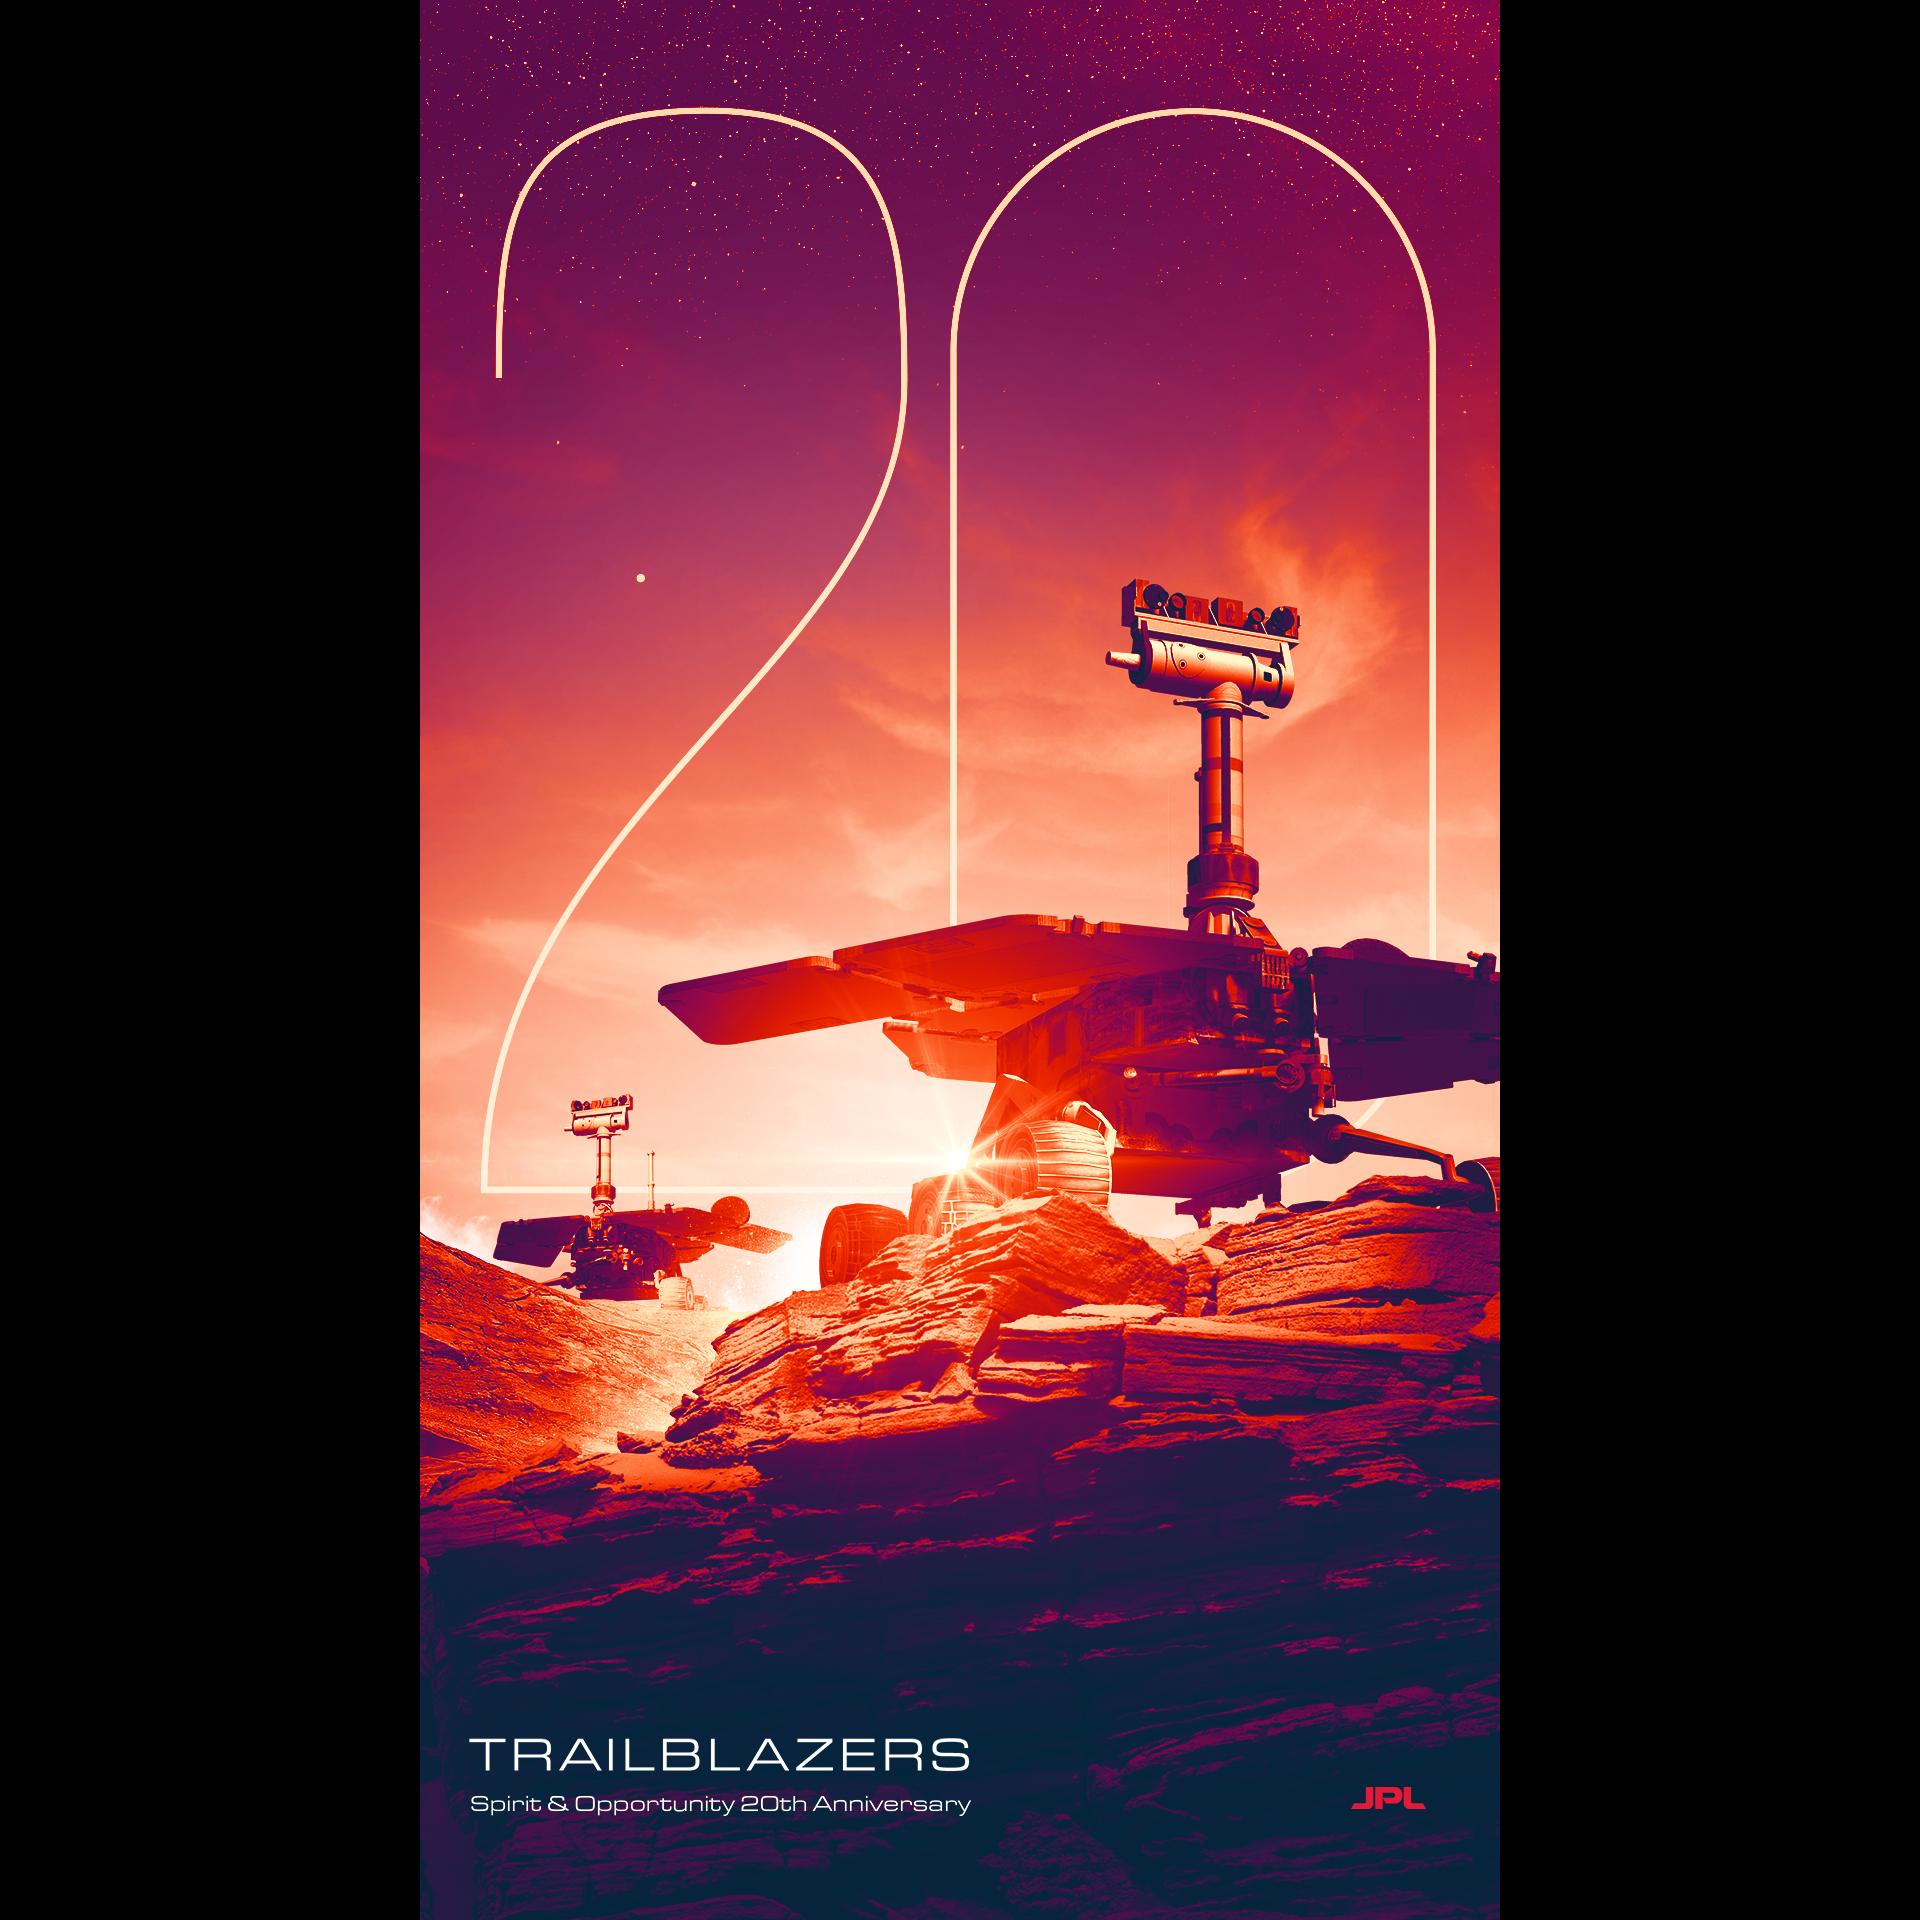 In this commemorative poster, Spirit and Opportunity, NASA's twin rovers, pose atop the rocky Martian landscape, facing away from each other. The dominant colors of the image are red, purple, orange, and white. The Martian sky, which fades from purple at the top to orange at the bottom, takes up three-quarters of the image. A light orange "20" in a thin, simple font stretches over the sky; it is slightly covered up by the rovers. At bottom left is the text "Trailblazers" and "Spirit & Opportunity 20th Anniversary." At bottom right is the red JPL logo.